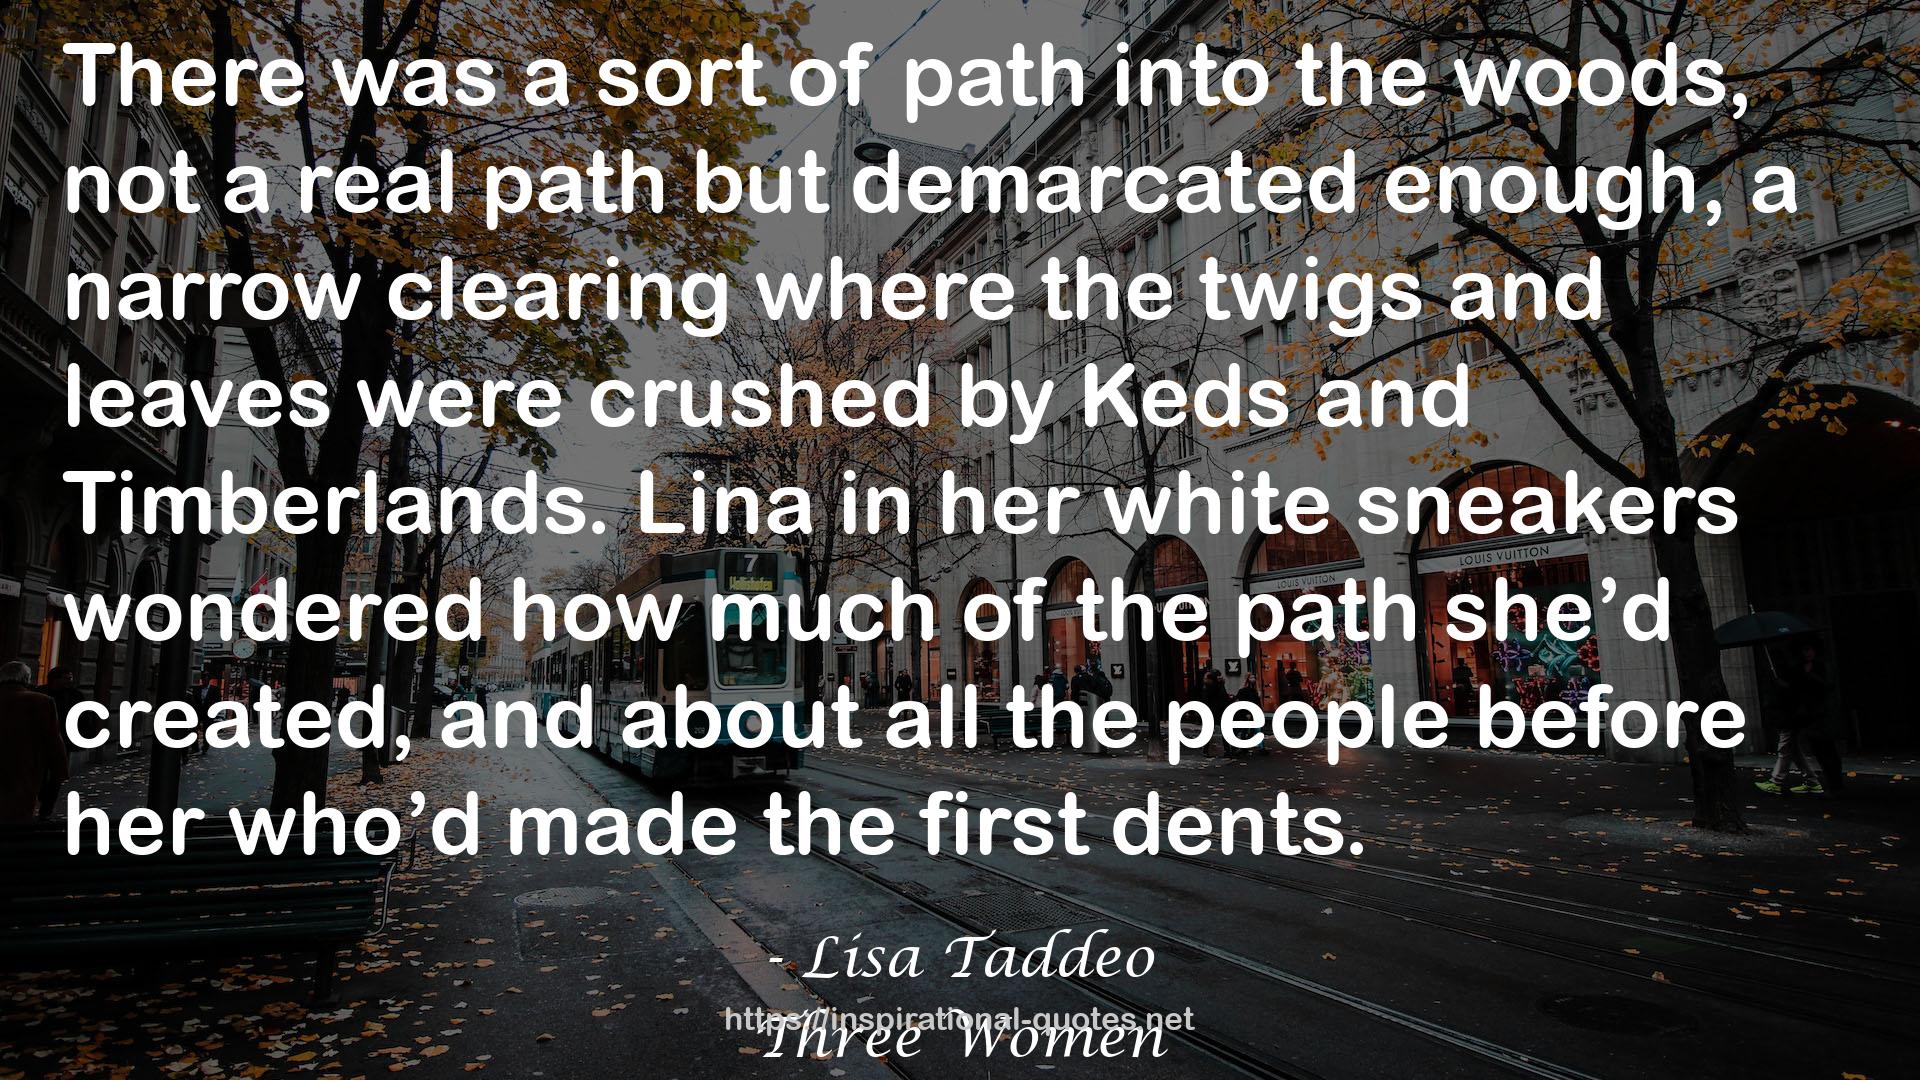 Lisa Taddeo QUOTES